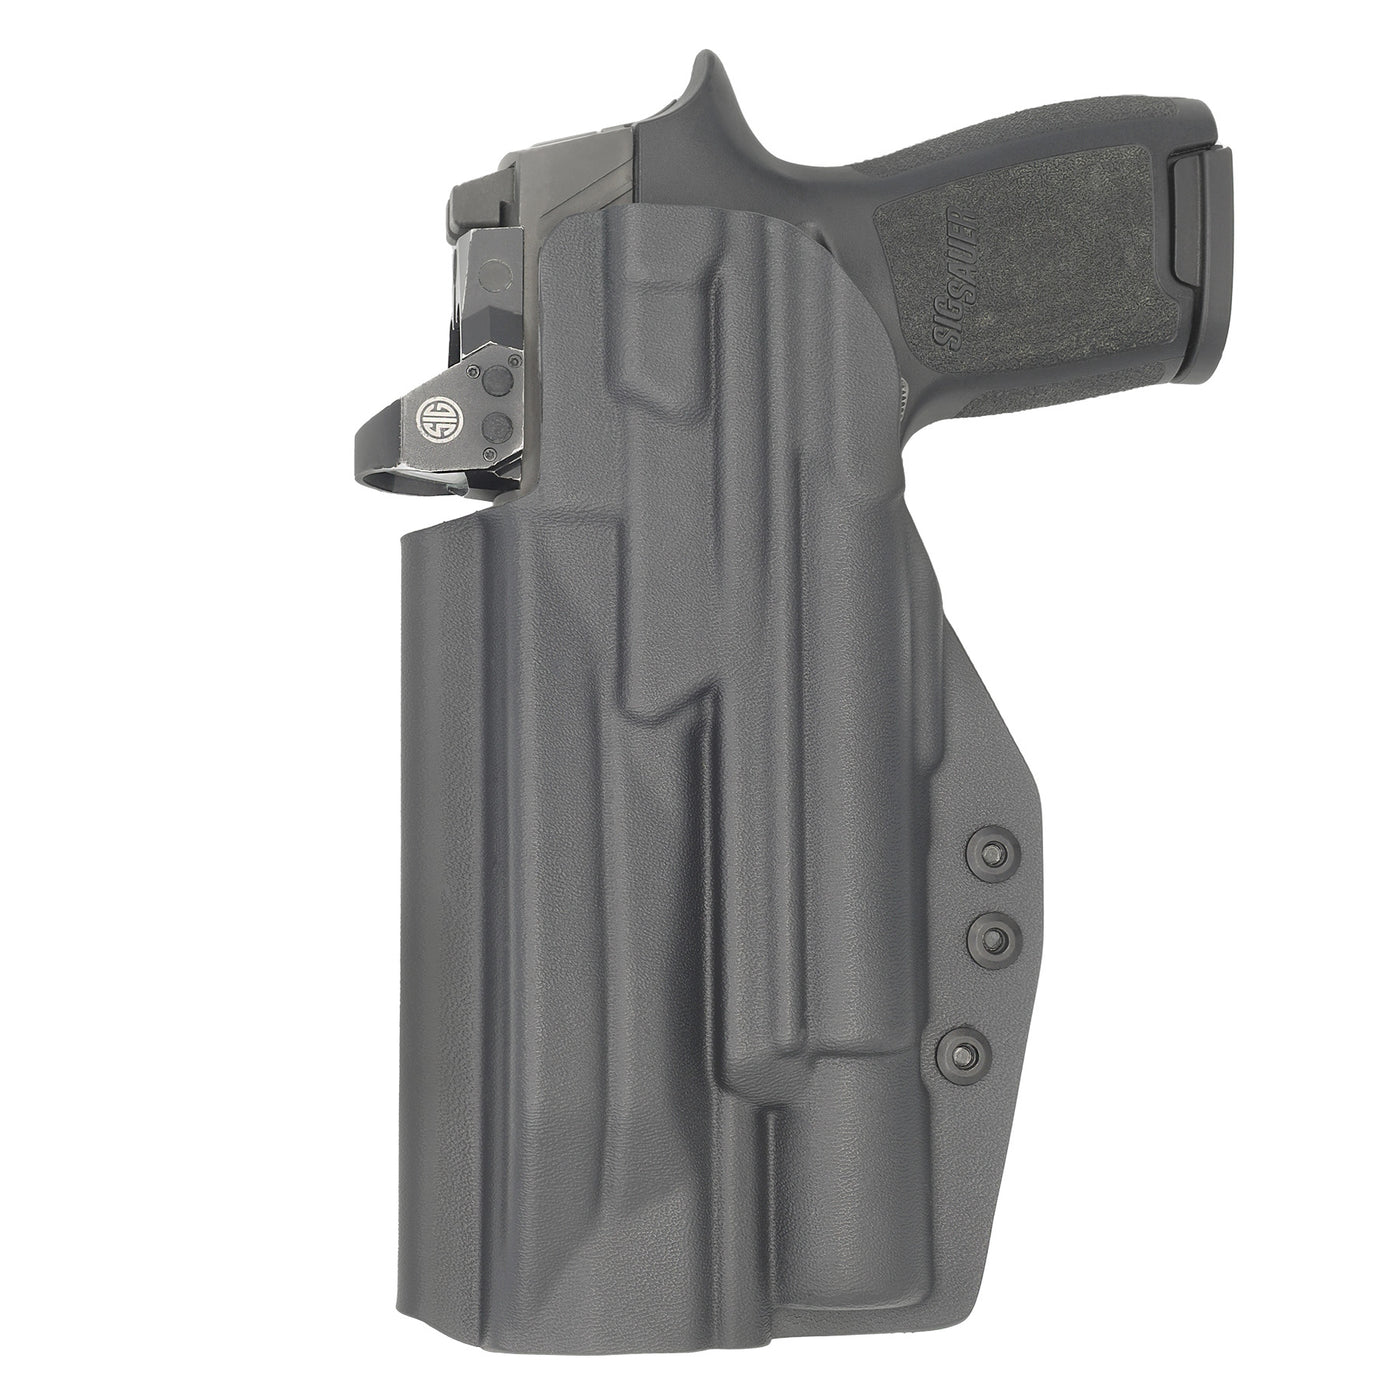 C&G Holsters Quickship IWB Tactical SIG P320/X5 Surefire X300 holster in holstered position back view